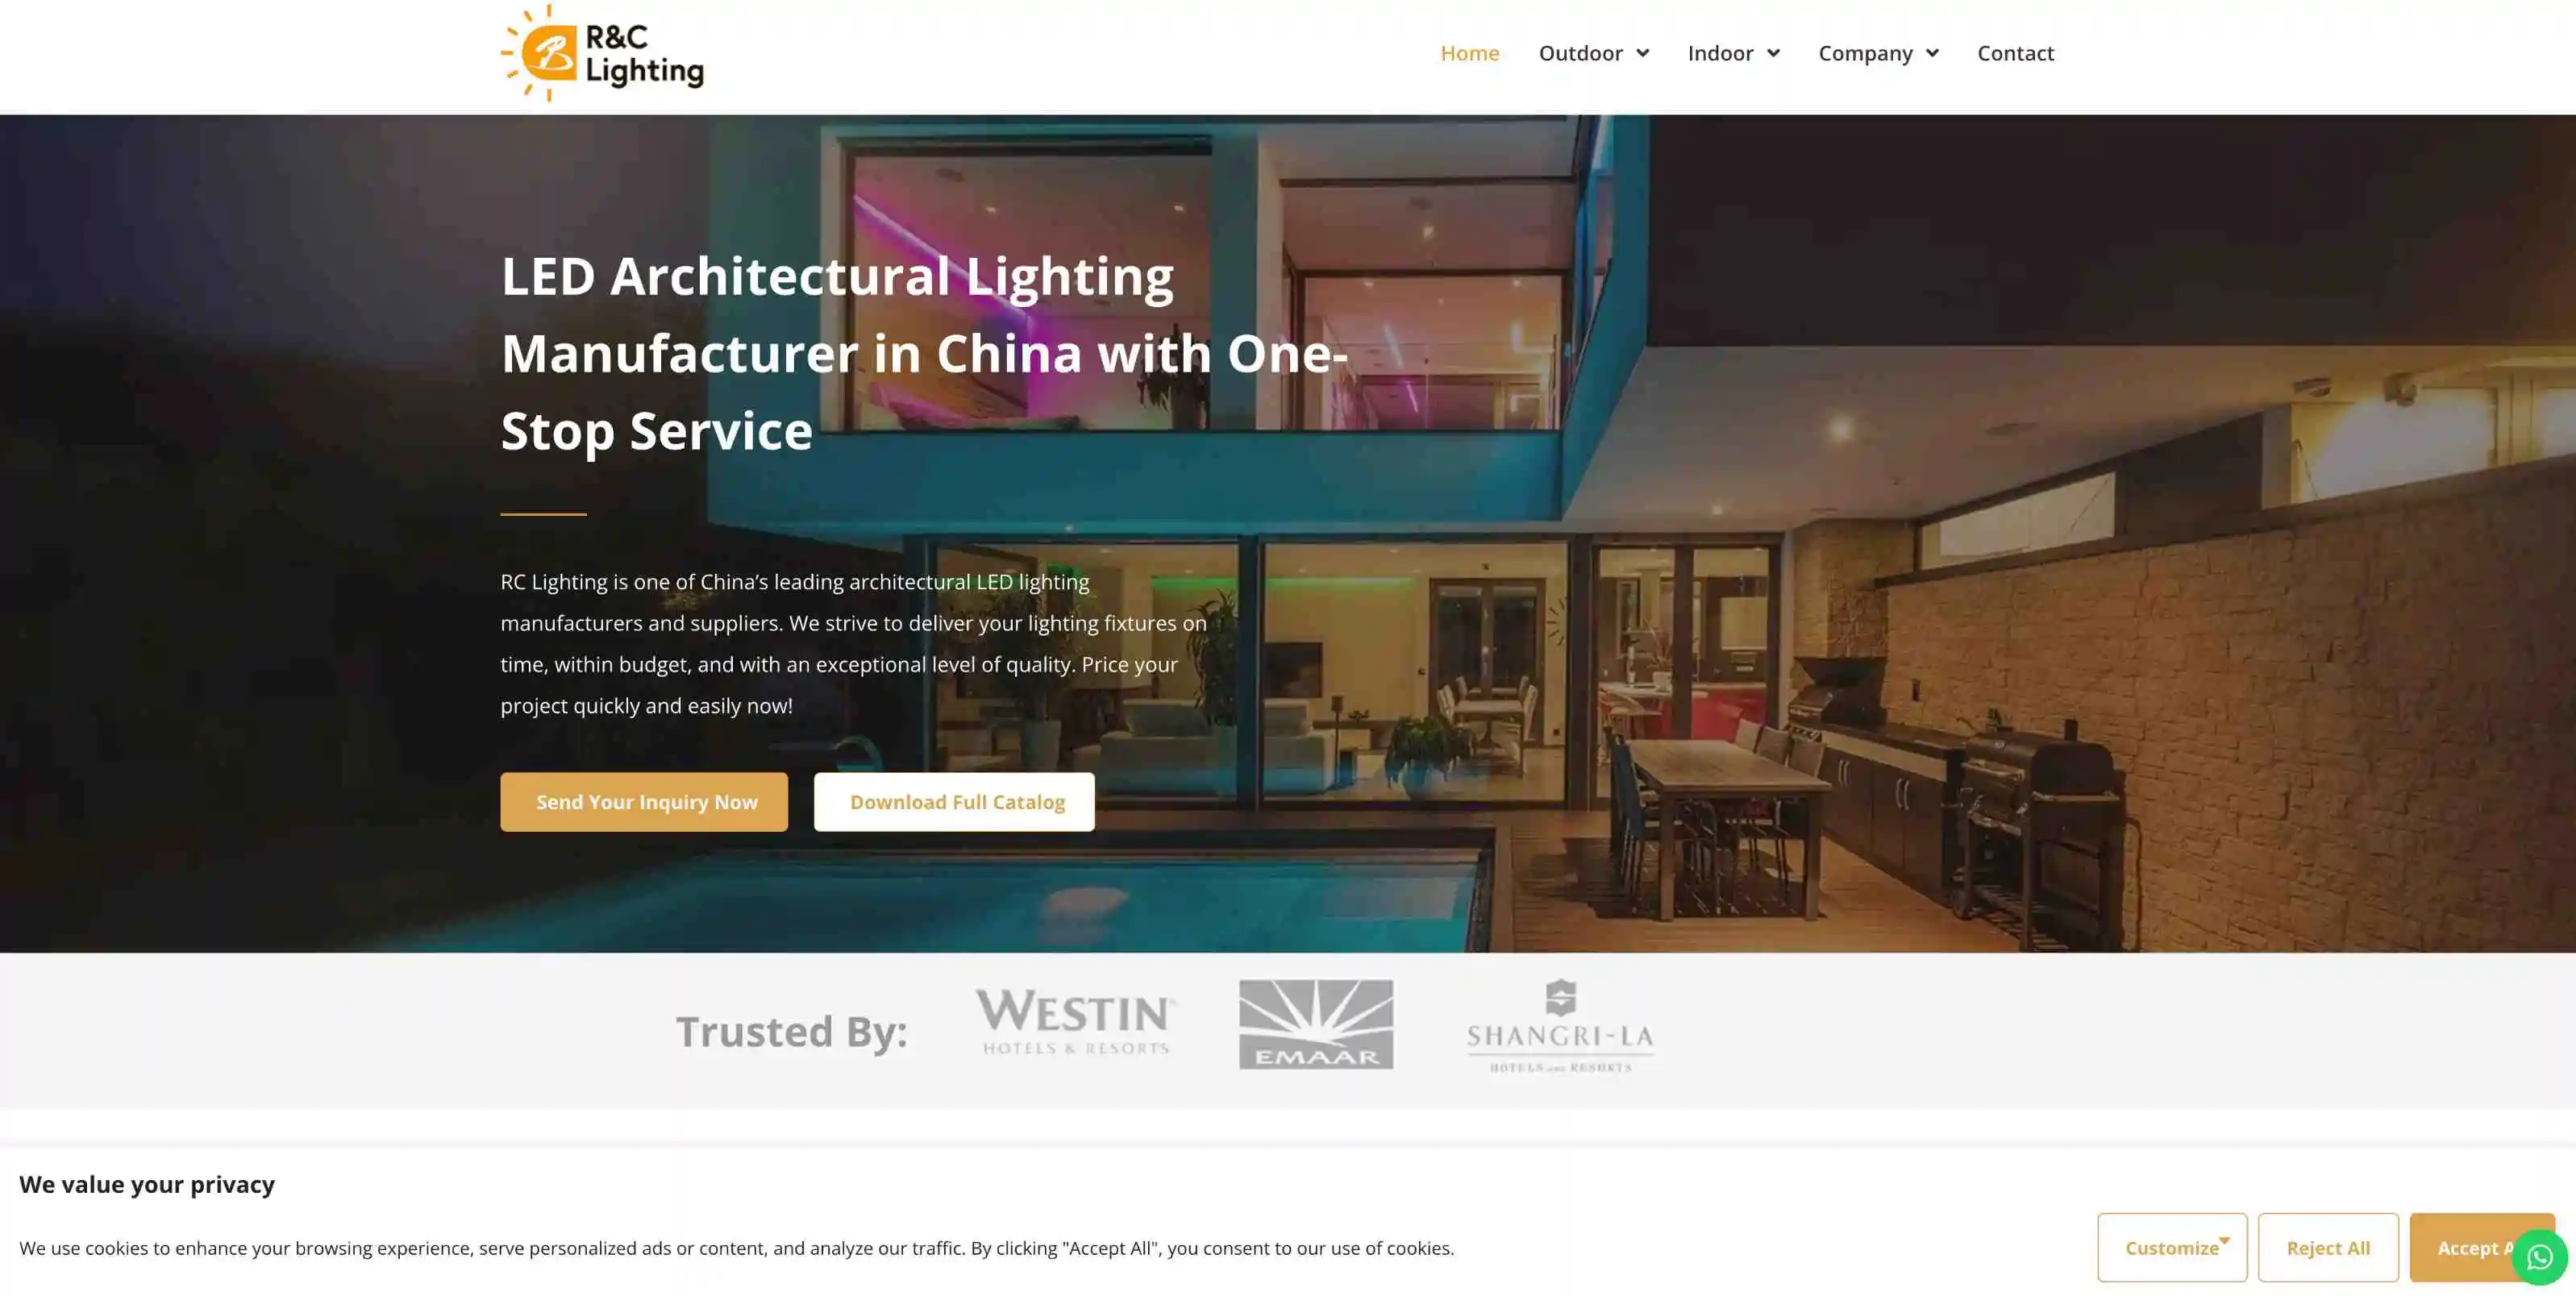 A sleek and modern website design for RC Lighting company showcasing various lighting products